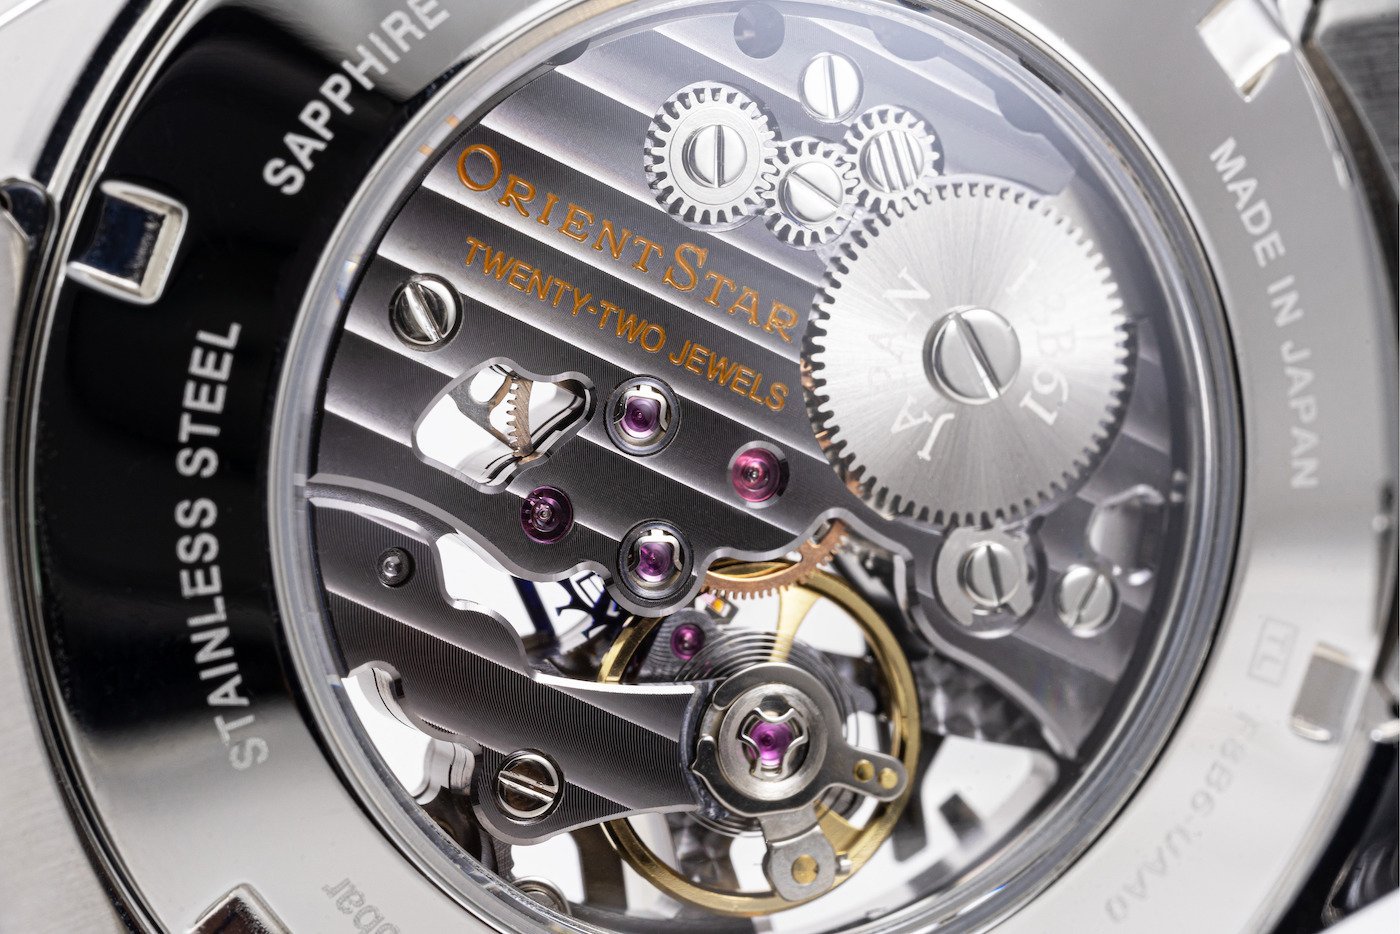 Orient Star introduces new Skeleton model 